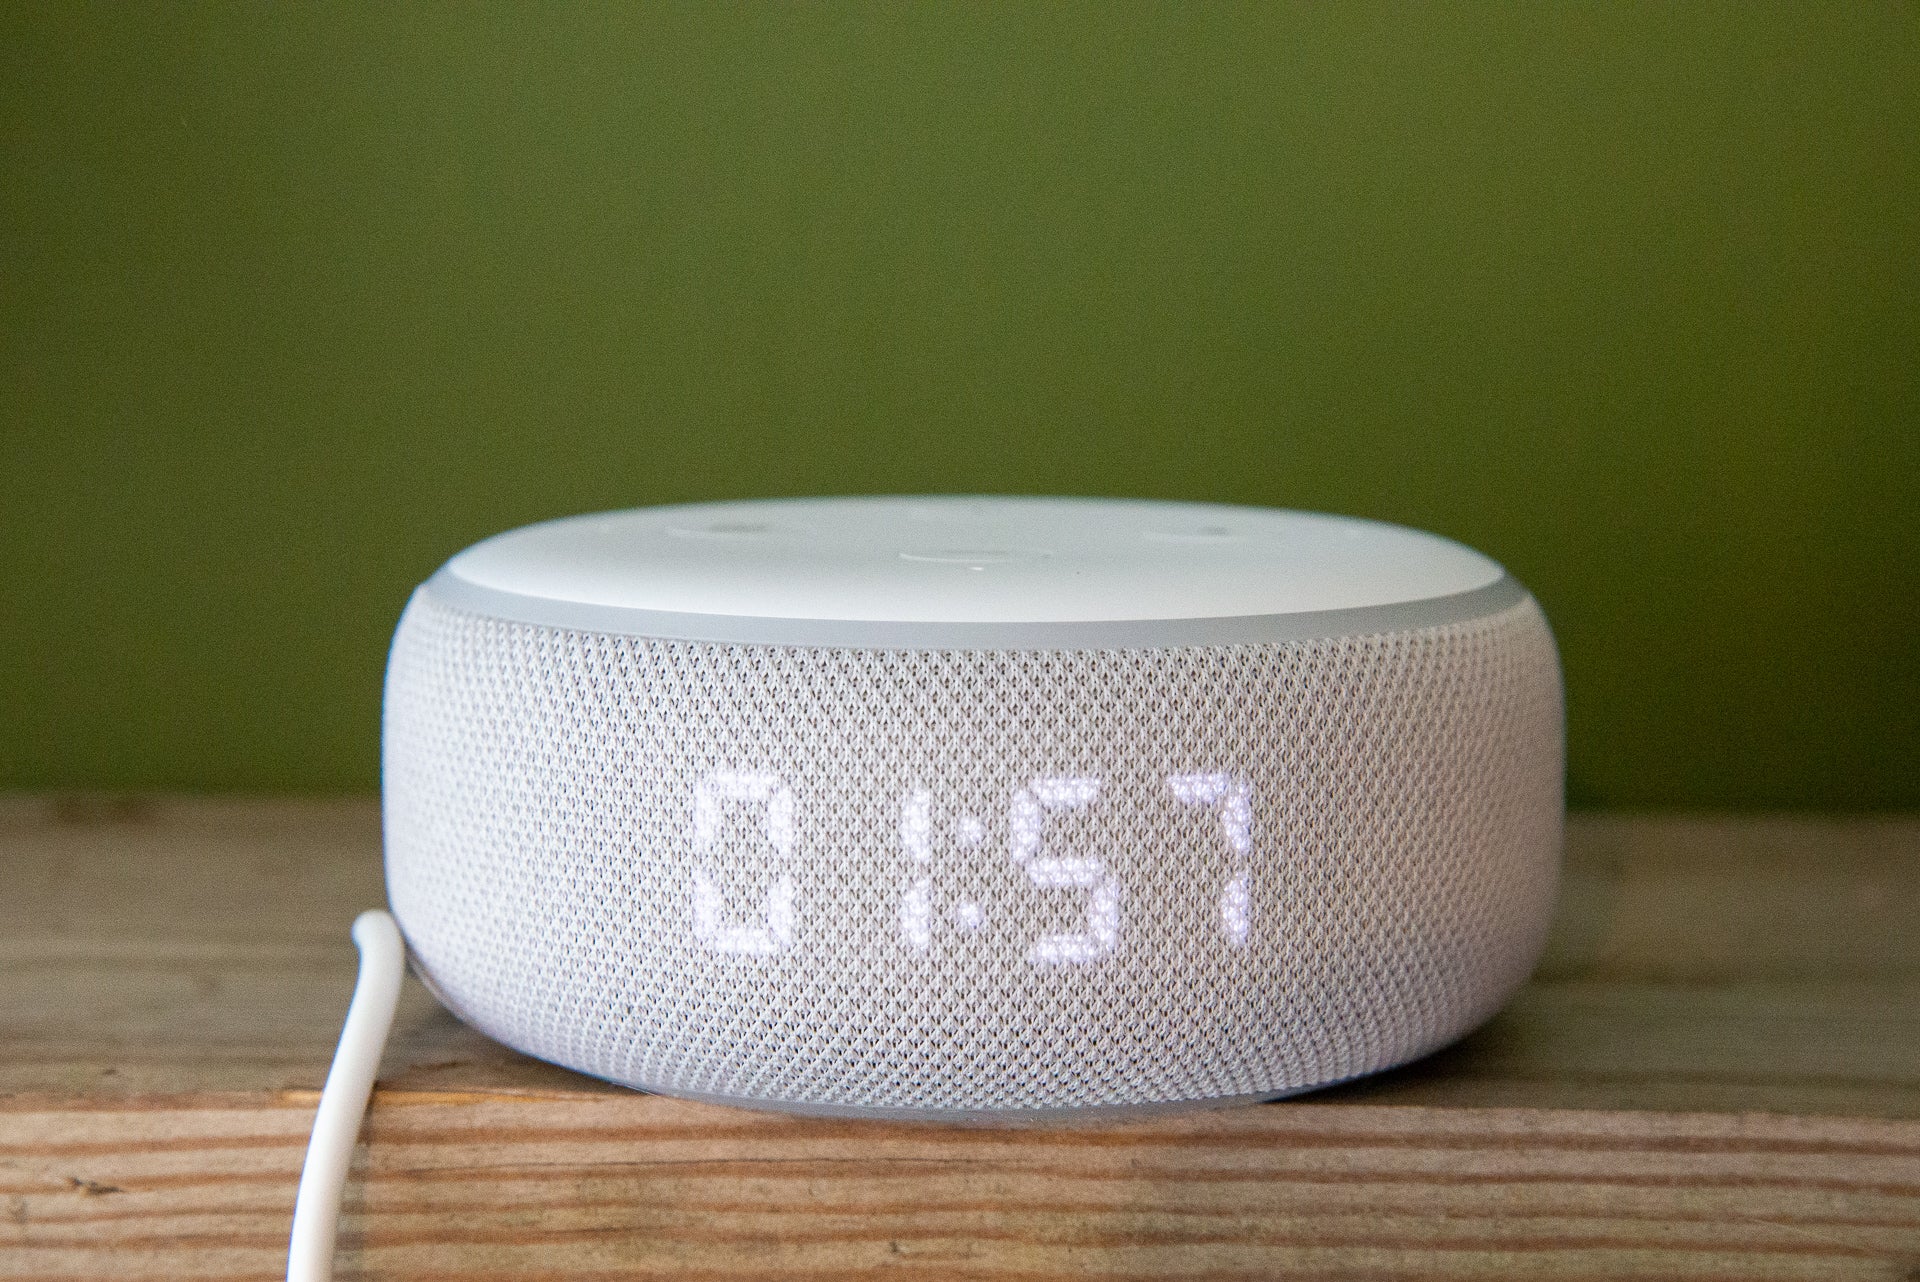 Amazon Echo Dot with Clock timer